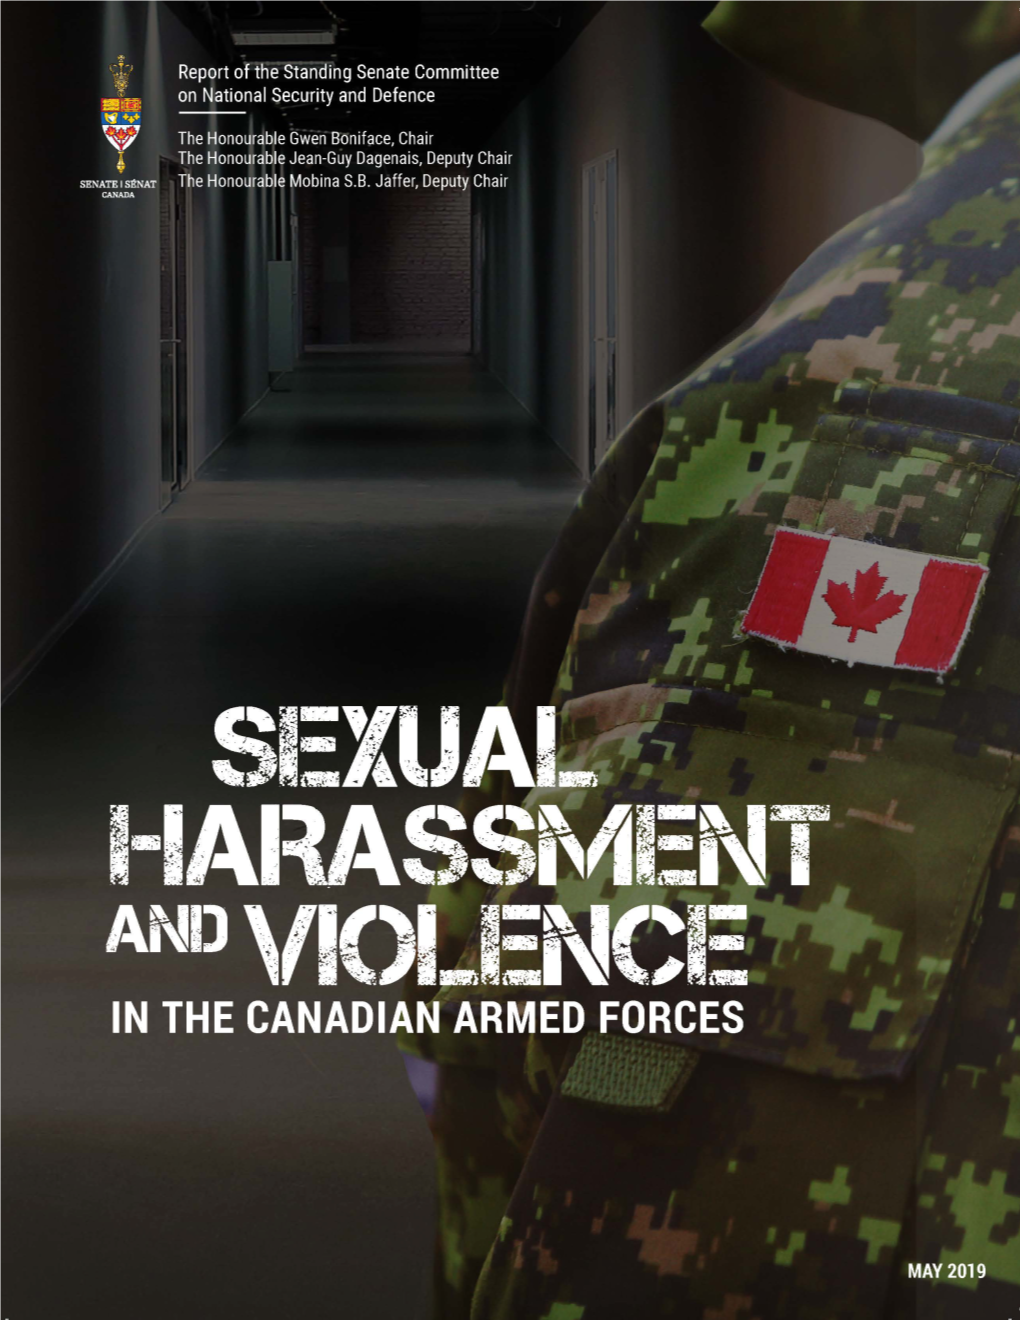 Sexual Harassment and Violence in the Canadian Armed Forces 3